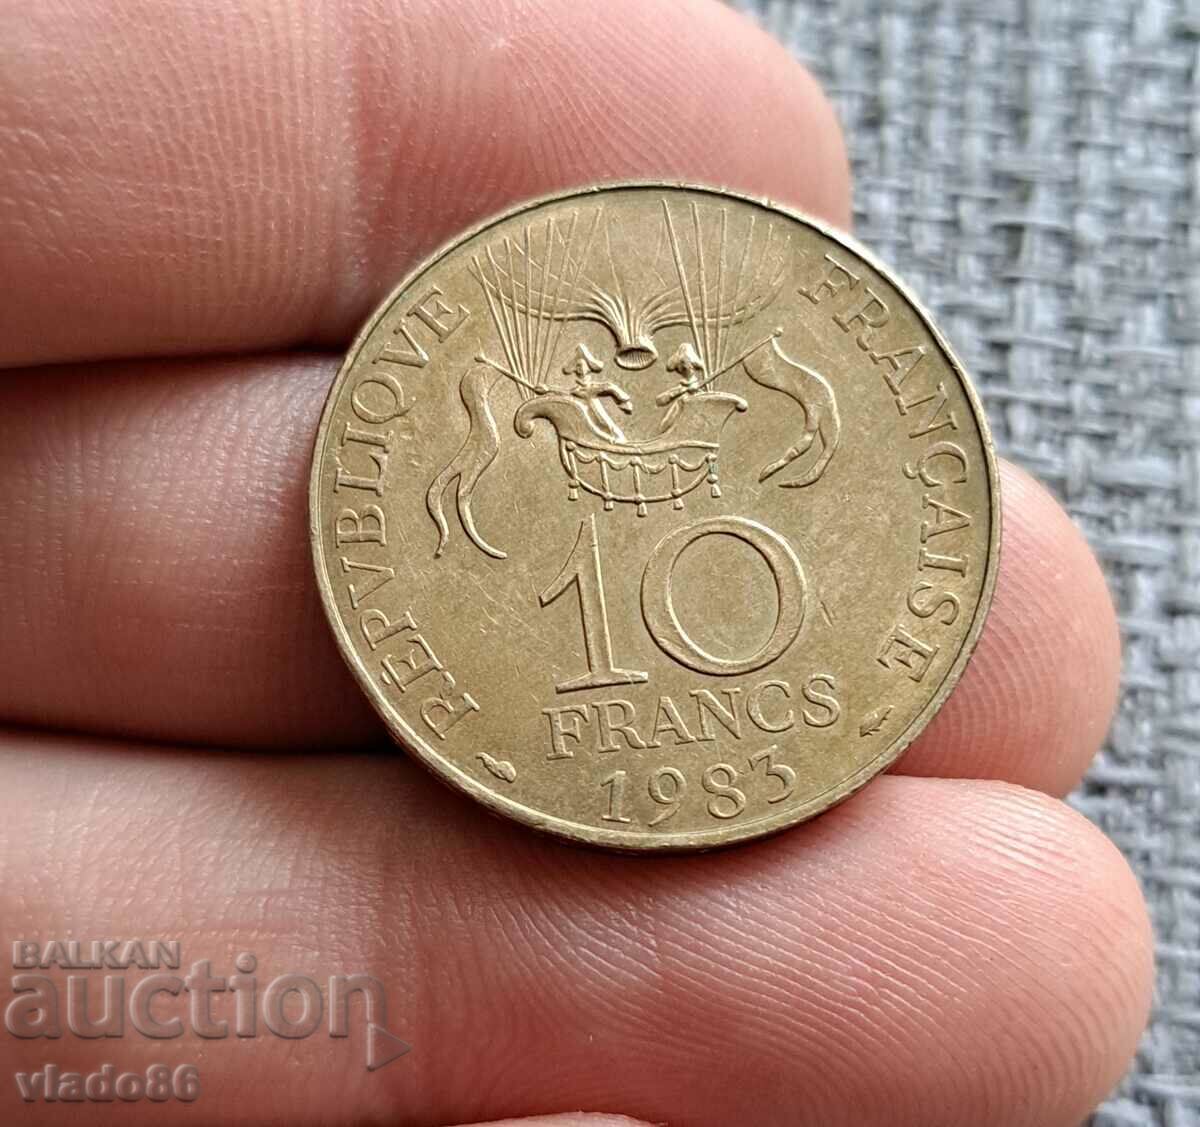 10 francs 1983, 200 years since the first balloon flight